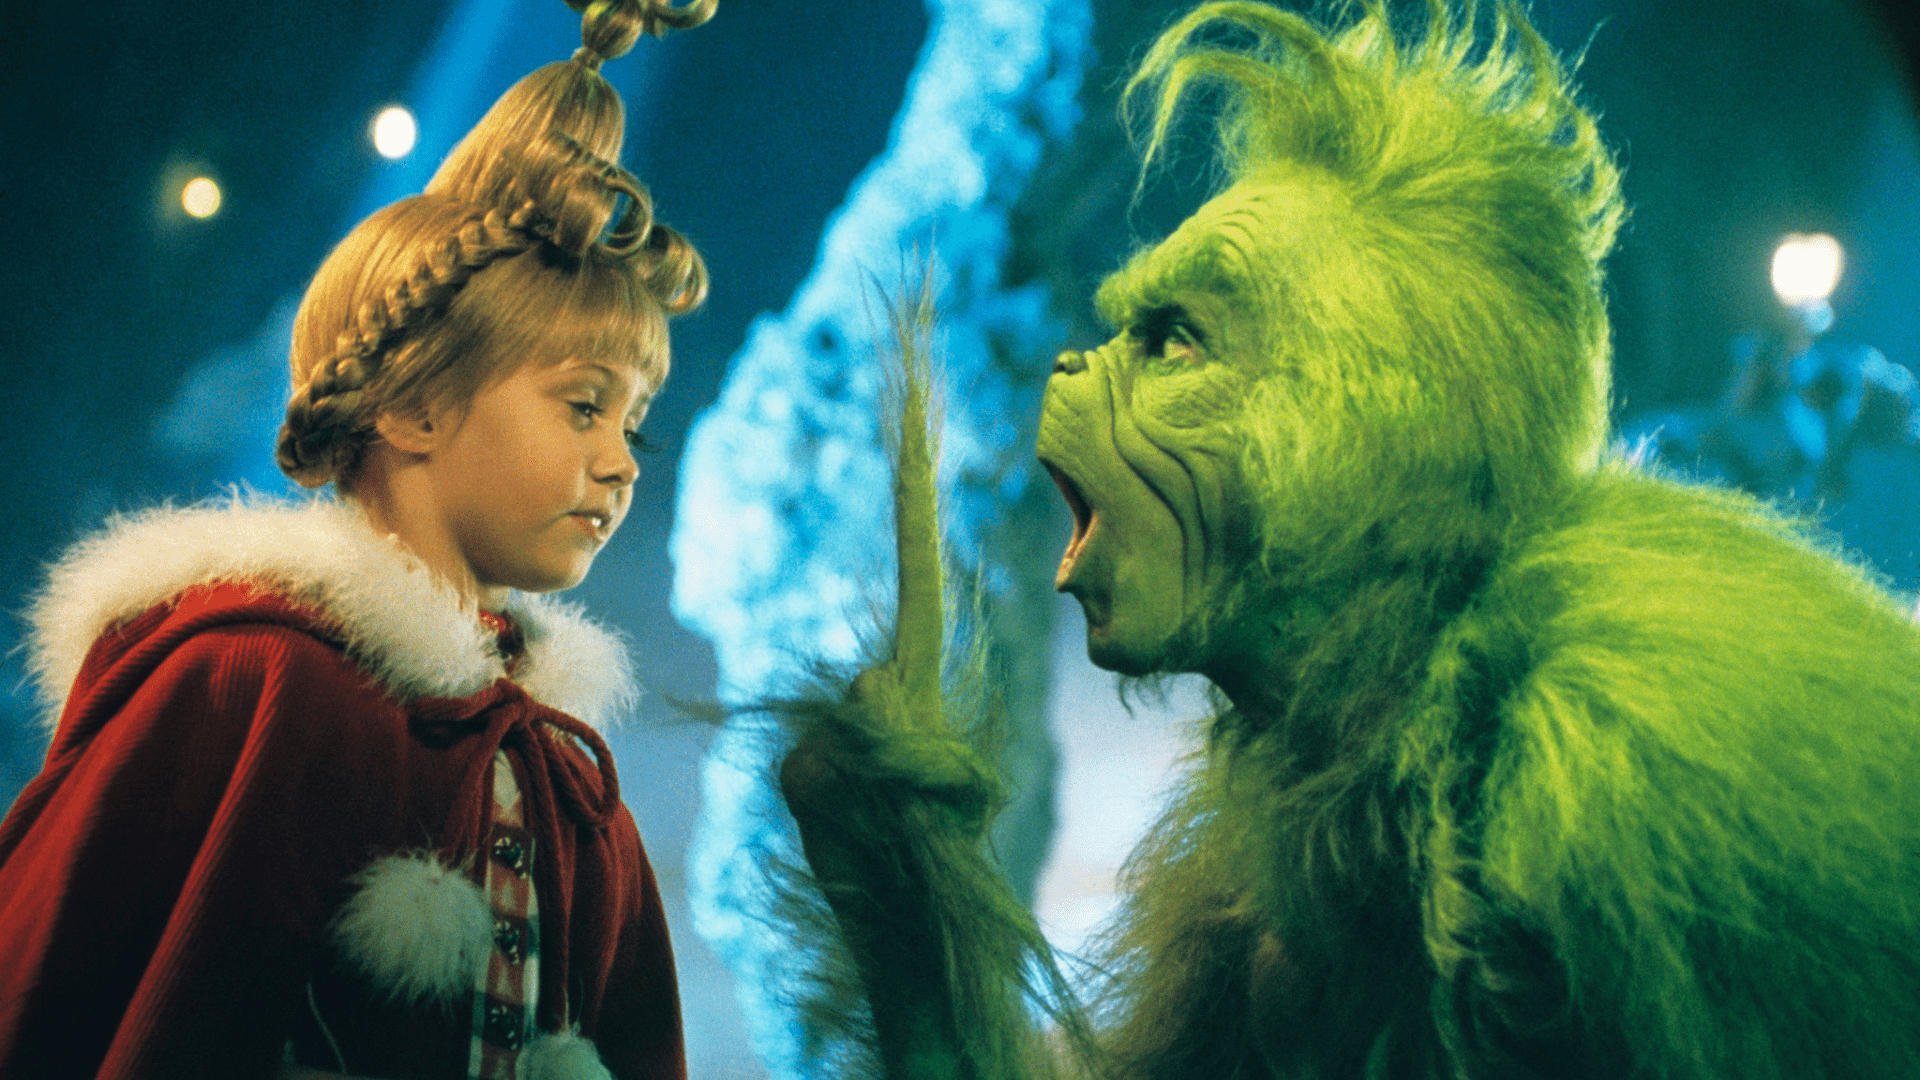 How the Grinch Stole Christmas Facts - 55 How the Grinch Stole Christmas (2000) Facts You Never Knew Before